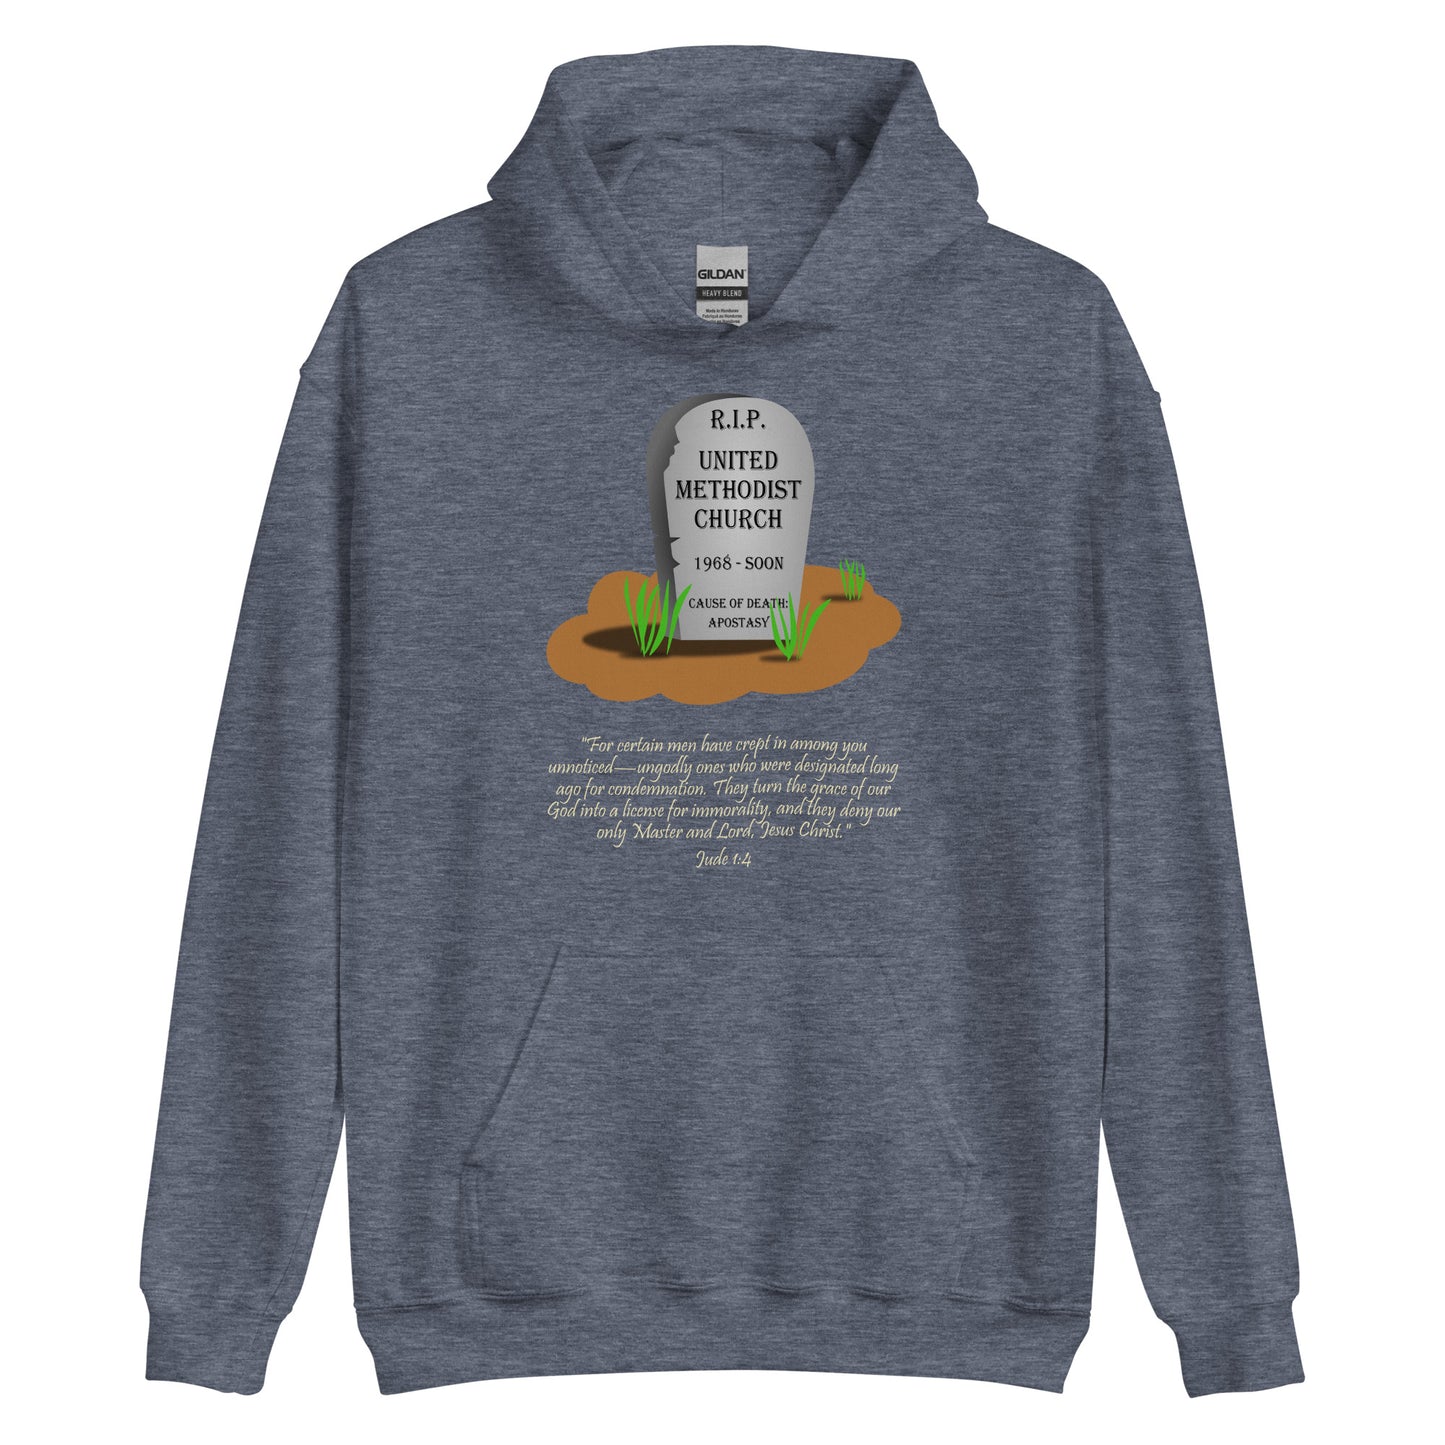 A009 Hoodie – Gildan 18500 Unisex Hoodie Featuring Jude 1:4 with a Graphic of a Tombstone Bearing the Text “R.I.P. United Methodist Church, 1968-SOON, Cause of Death: Apostasy.